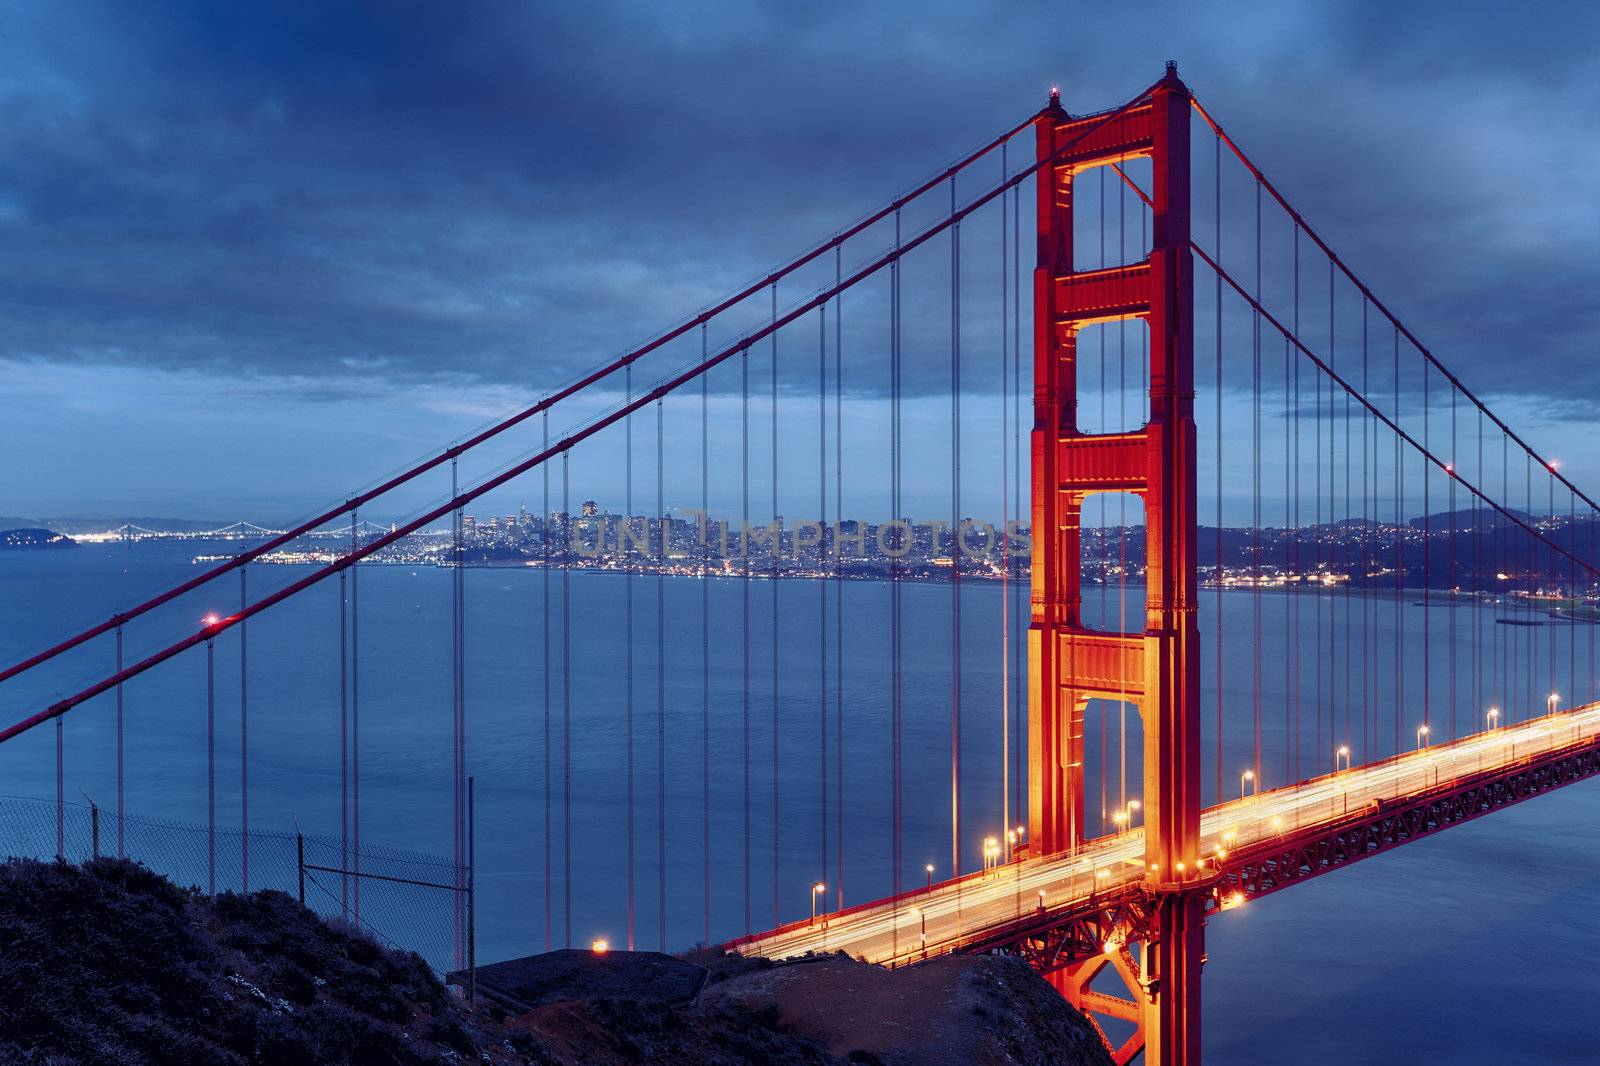 Night scene with famous Golden Gate Bridge and San Francisco lights